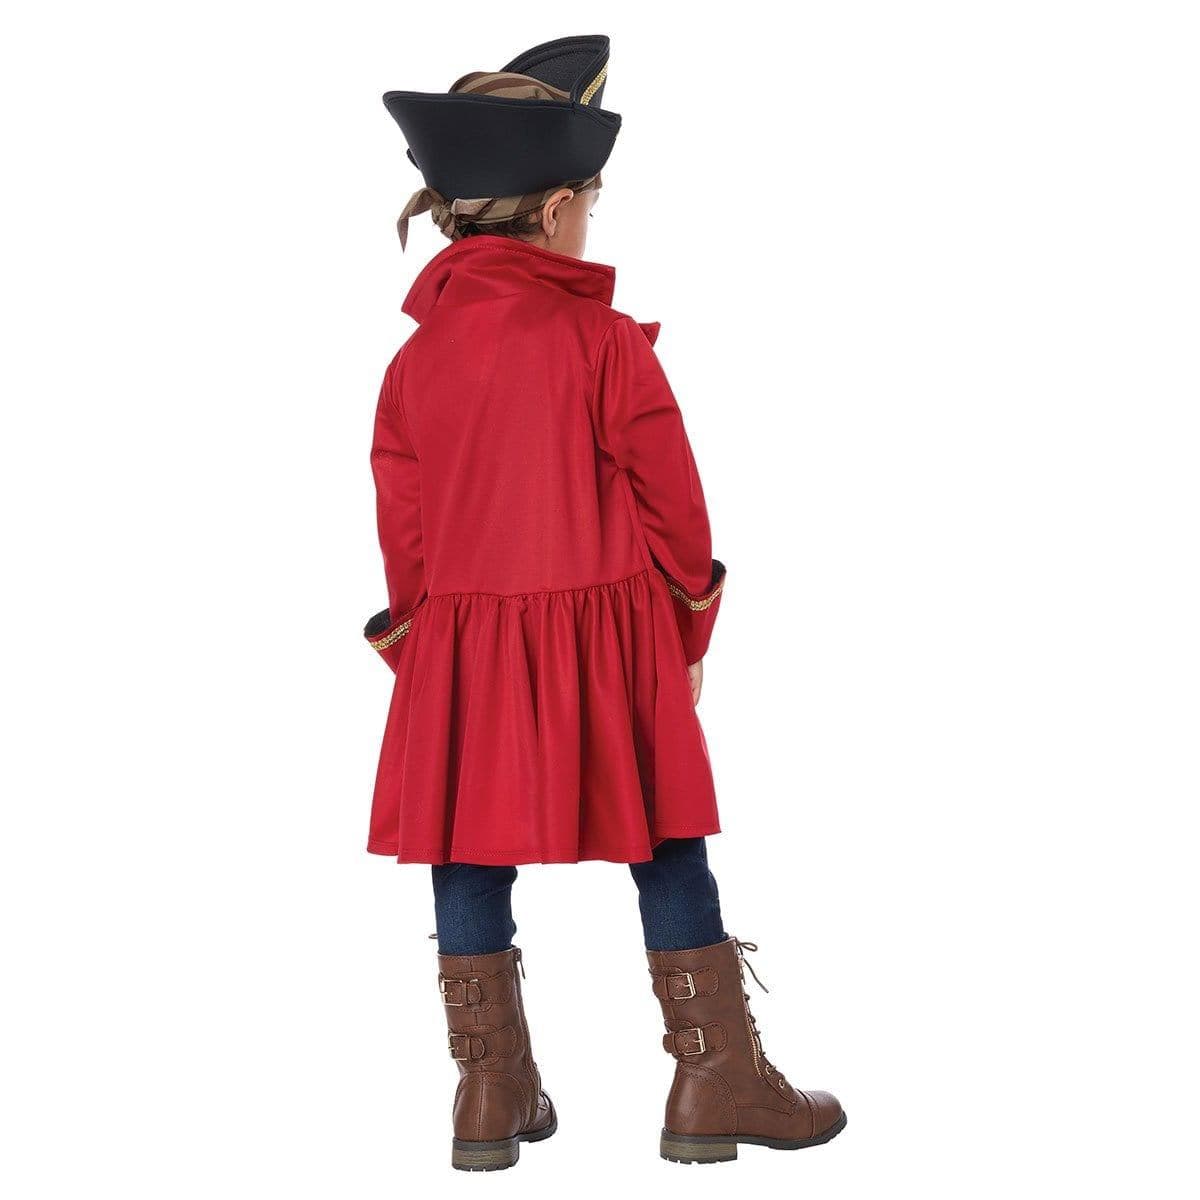 Buy Costumes Cap'n Shorty Costume for Kids sold at Party Expert